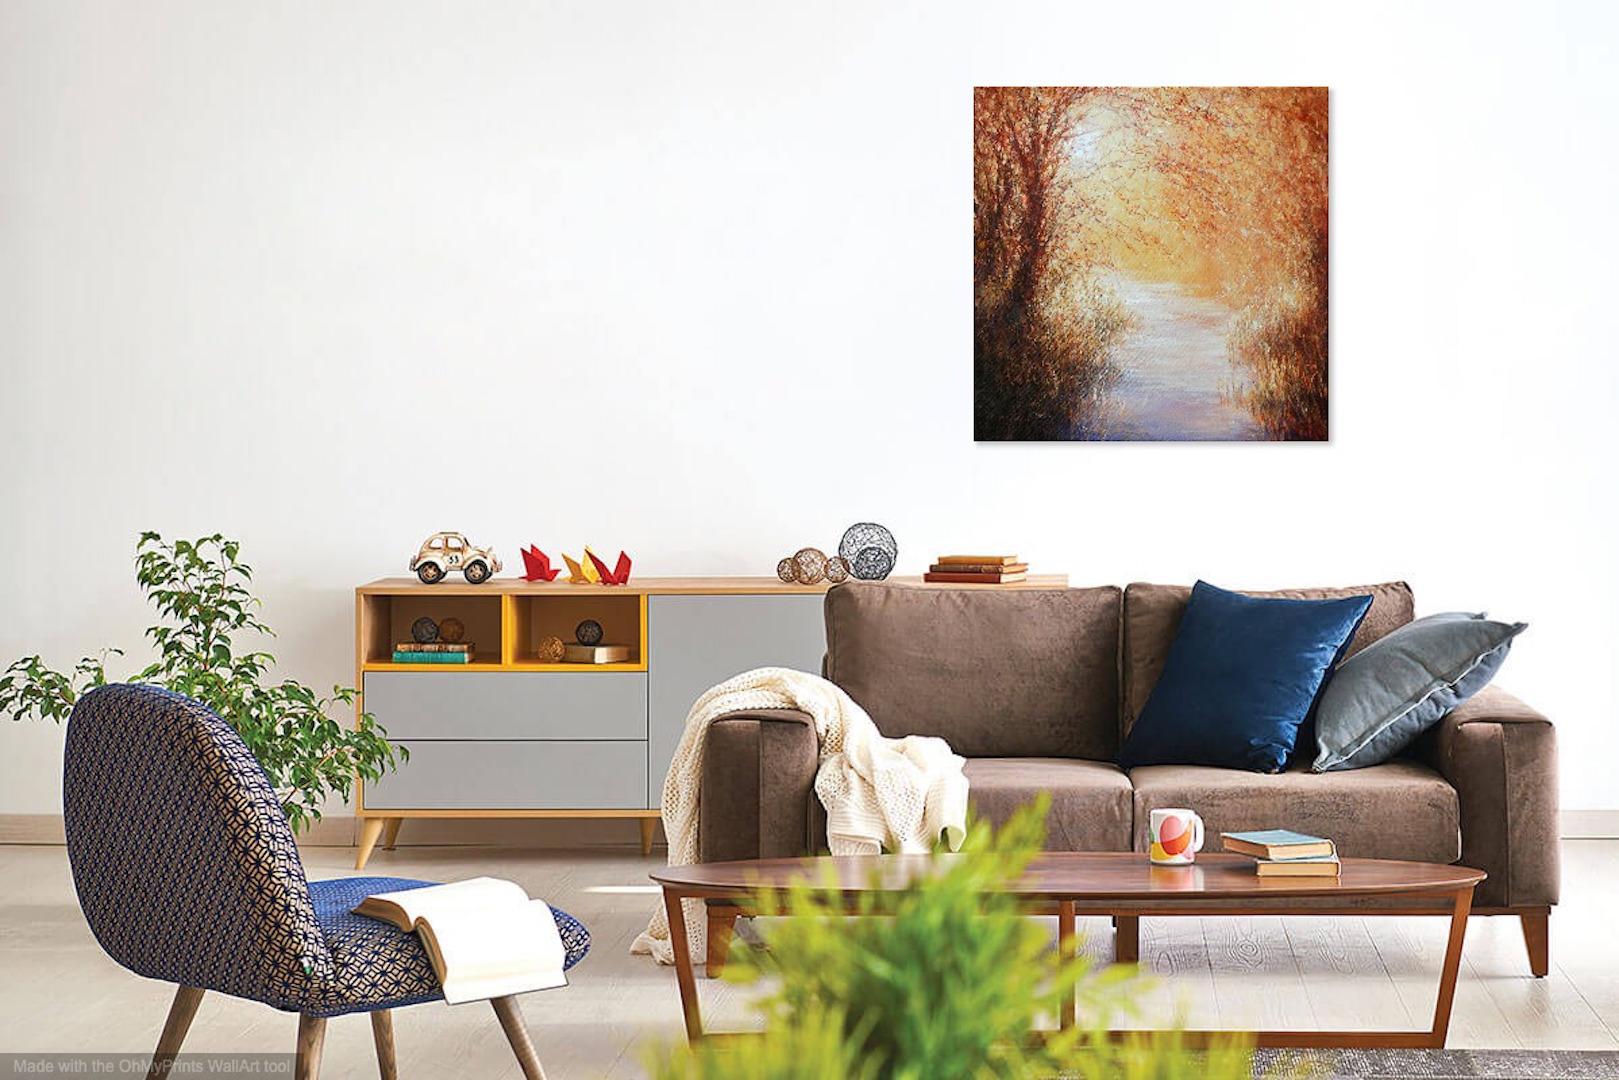 Mariusz Kaldowski
September Siesta
Original Acrylic Painting on Canvas
Acrylic Paint on Canvas
Sold Unframed
Framed Size: H 60cm x W 60cm
(Please note that in situ images are purely an indication of how a piece may look.)

An impressionistic